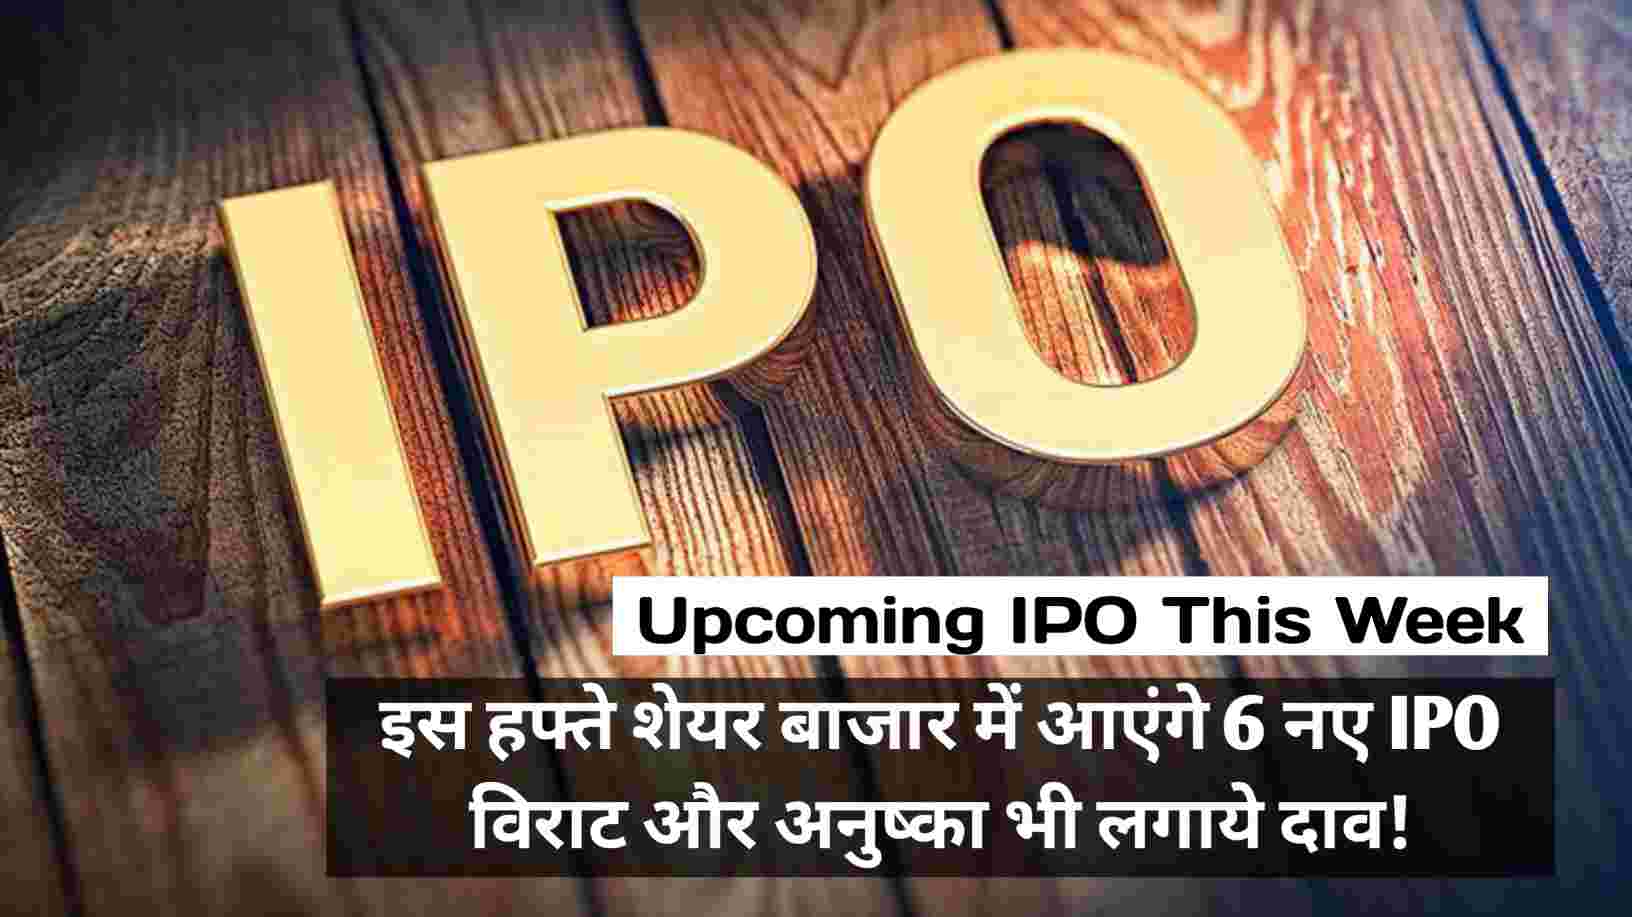 Upcoming IPO This Week 6 new IPOs will come in the stock market